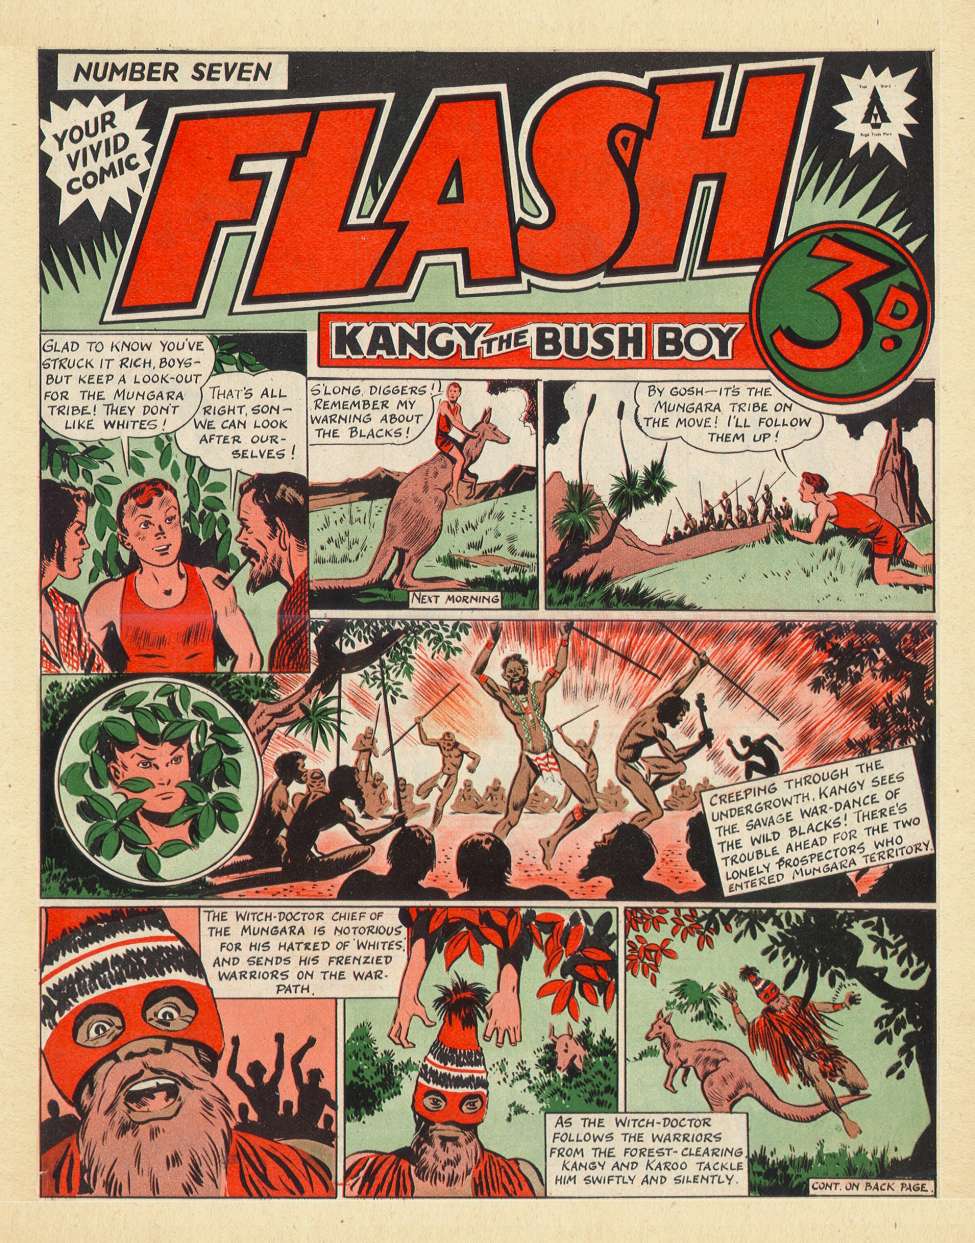 Book Cover For Flash 7